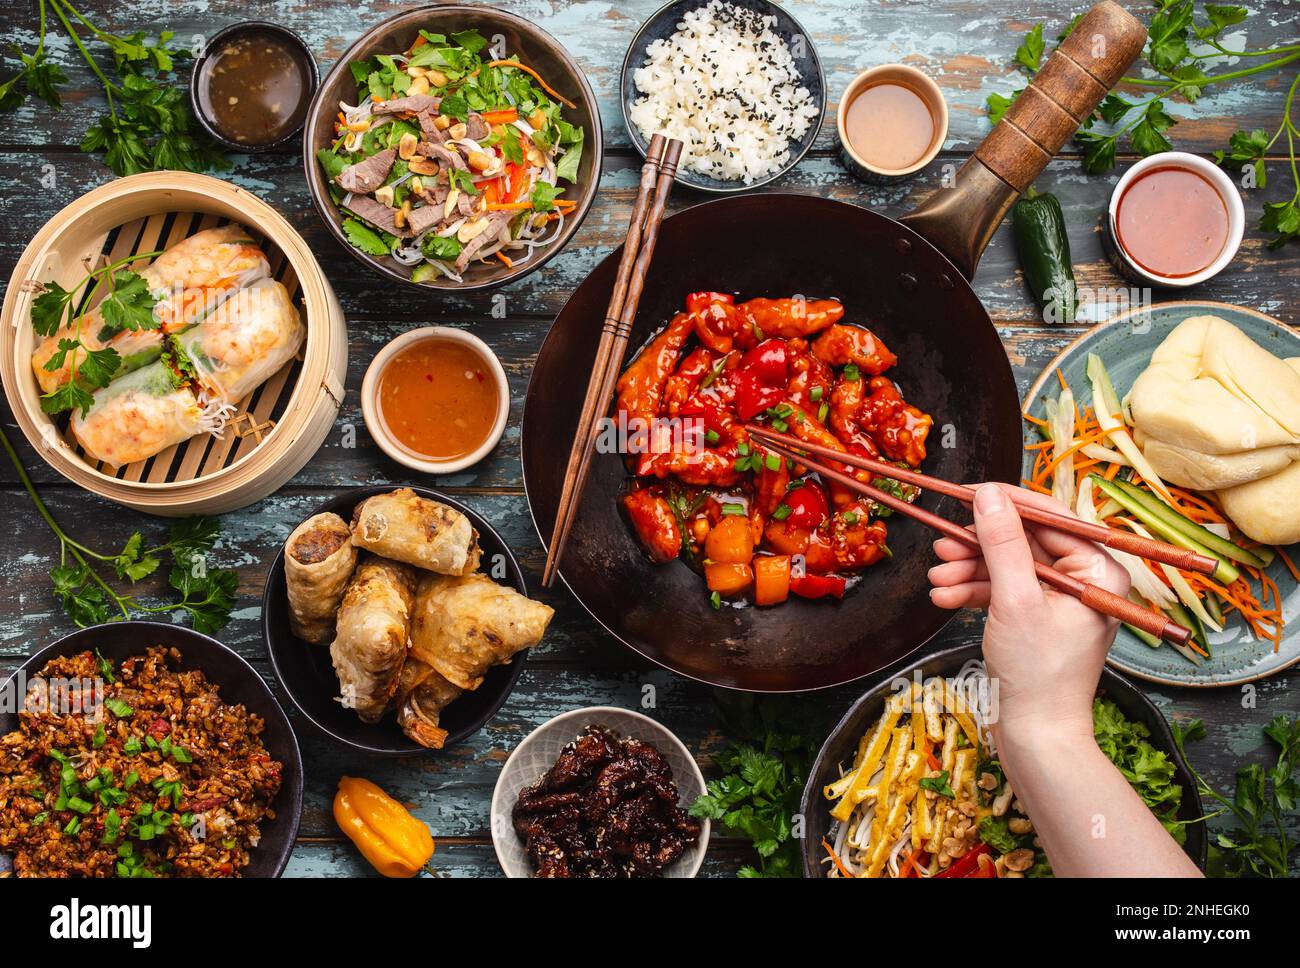 https://c8.alamy.com/comp/2NHEGK0/set-of-assorted-chinese-dishes-on-table-sweet-and-sour-chicken-in-wok-pan-dim-sum-in-bamboo-steamer-spring-rolls-noodles-salad-rice-steamed-2NHEGK0.jpg